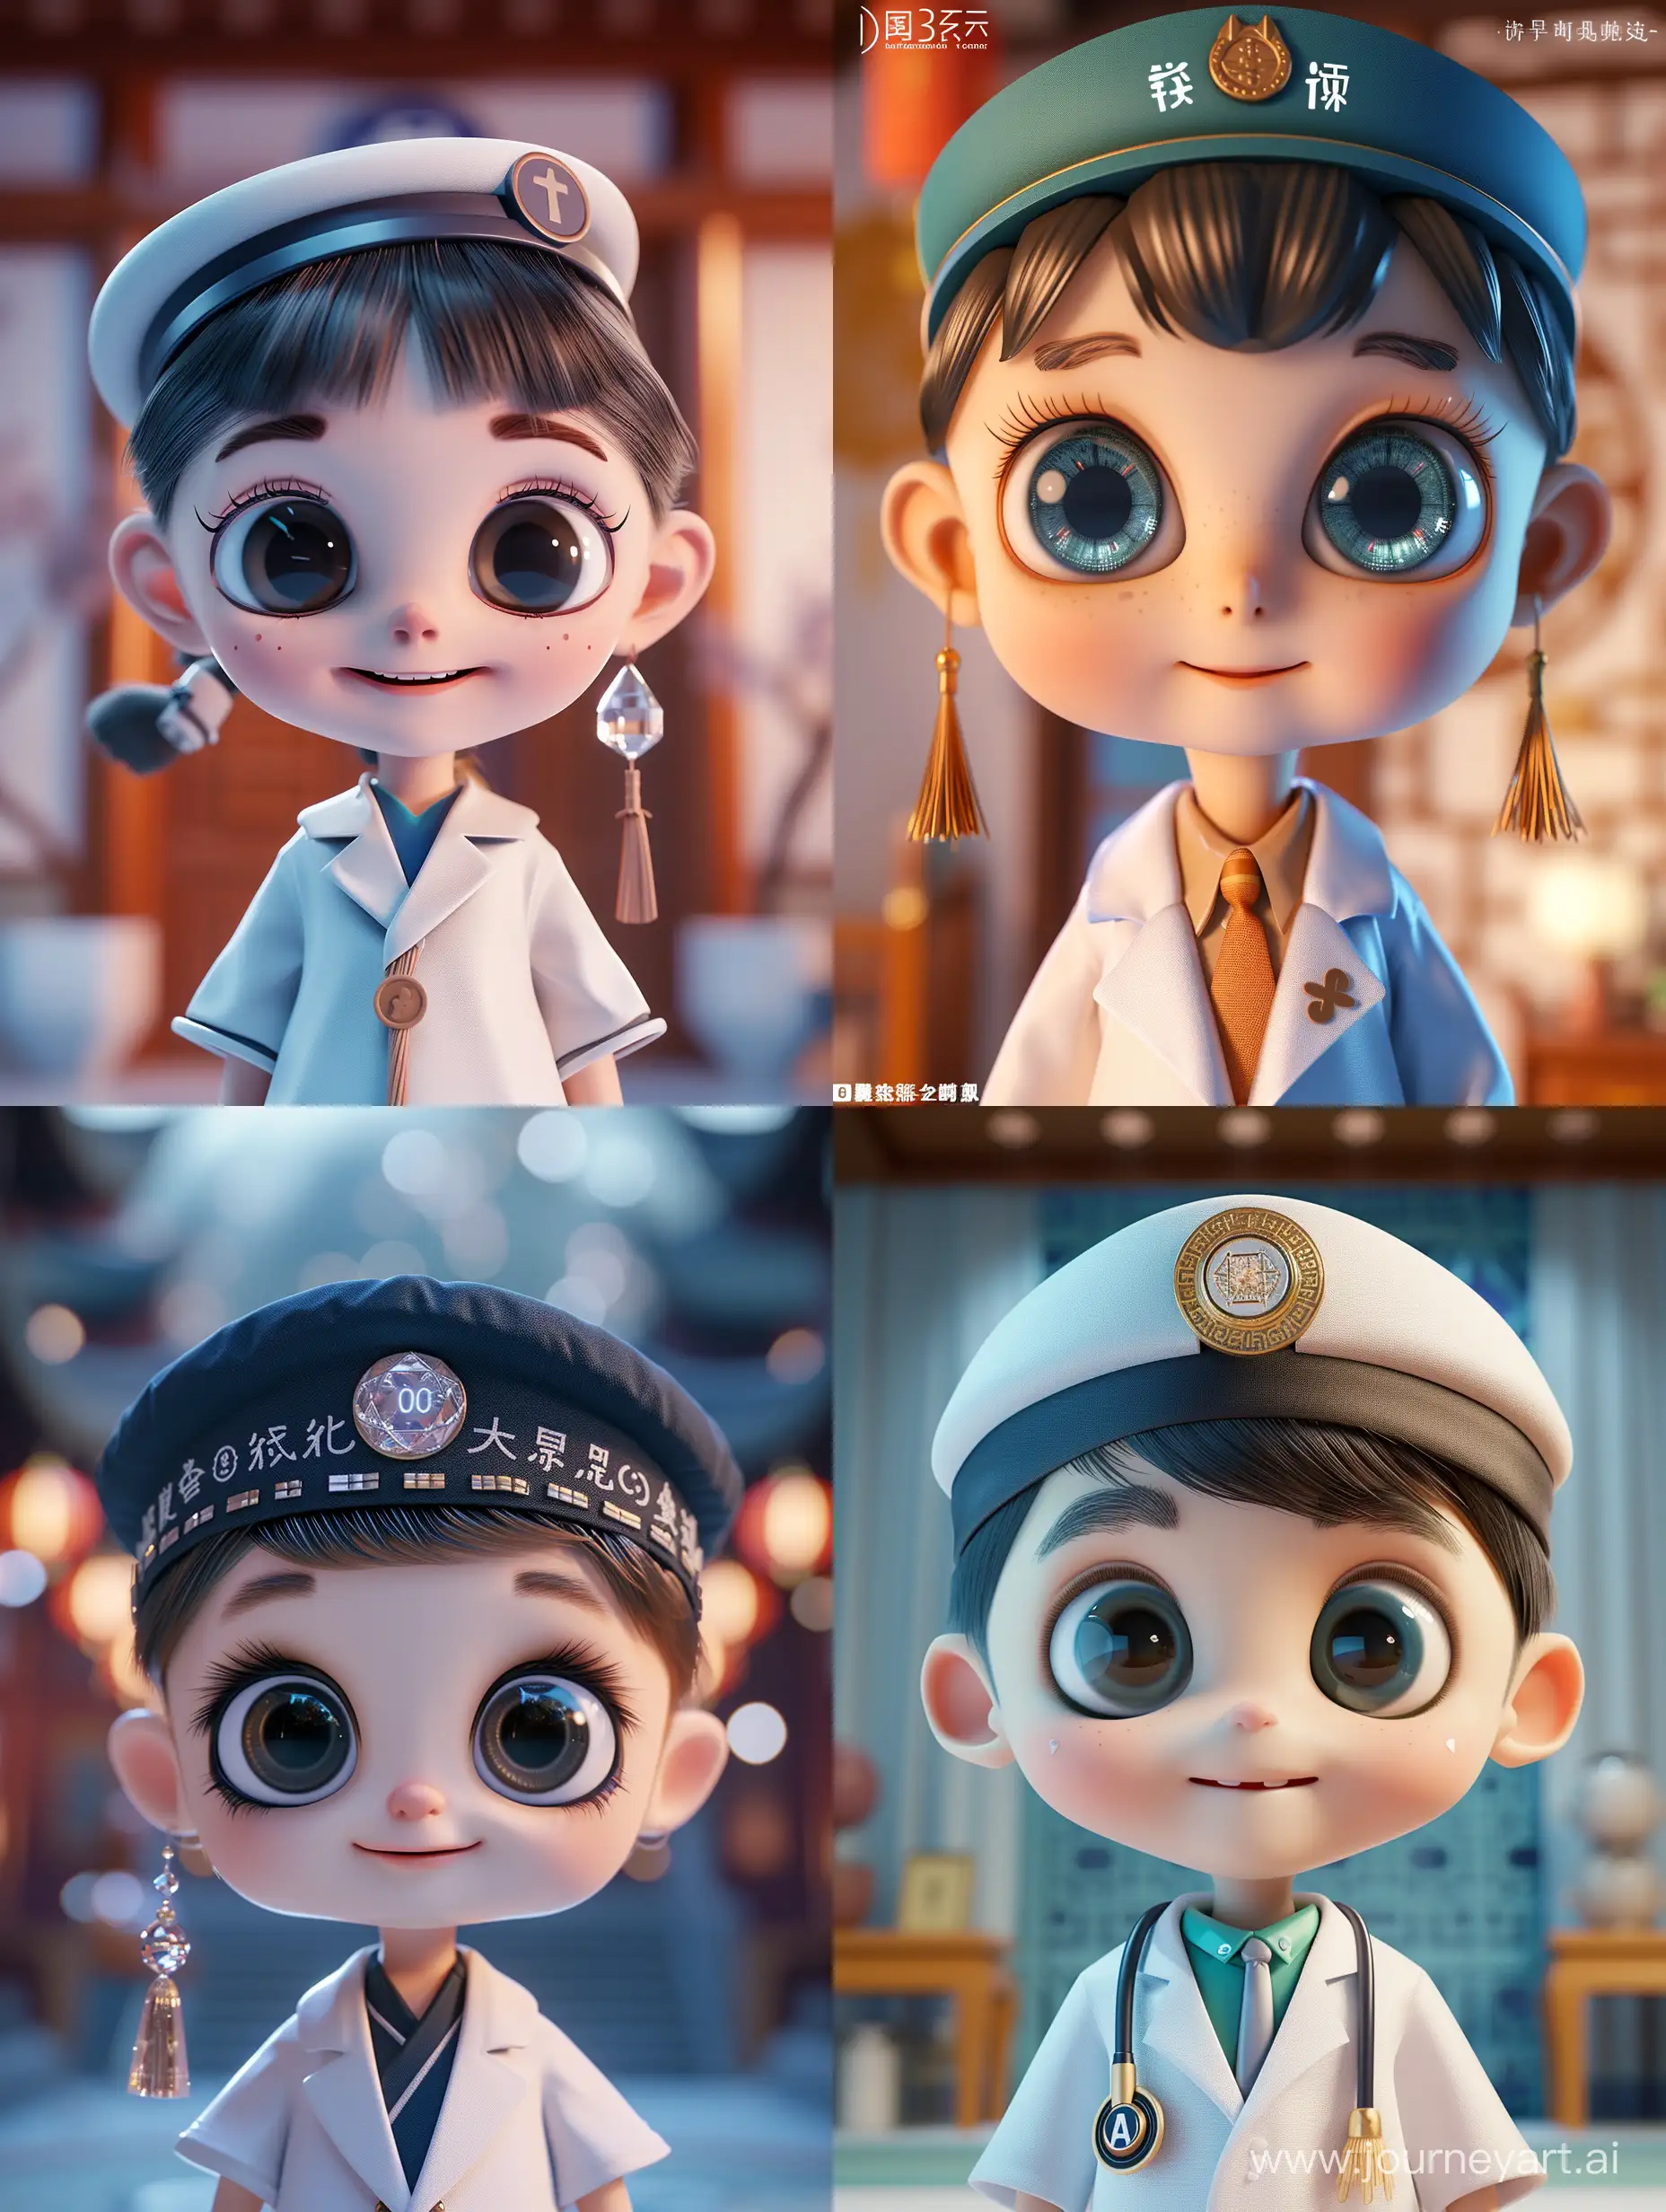 Adorable-3D-Cartoon-Doctor-with-Chinese-Architectural-Influence-and-Movie-Lighting